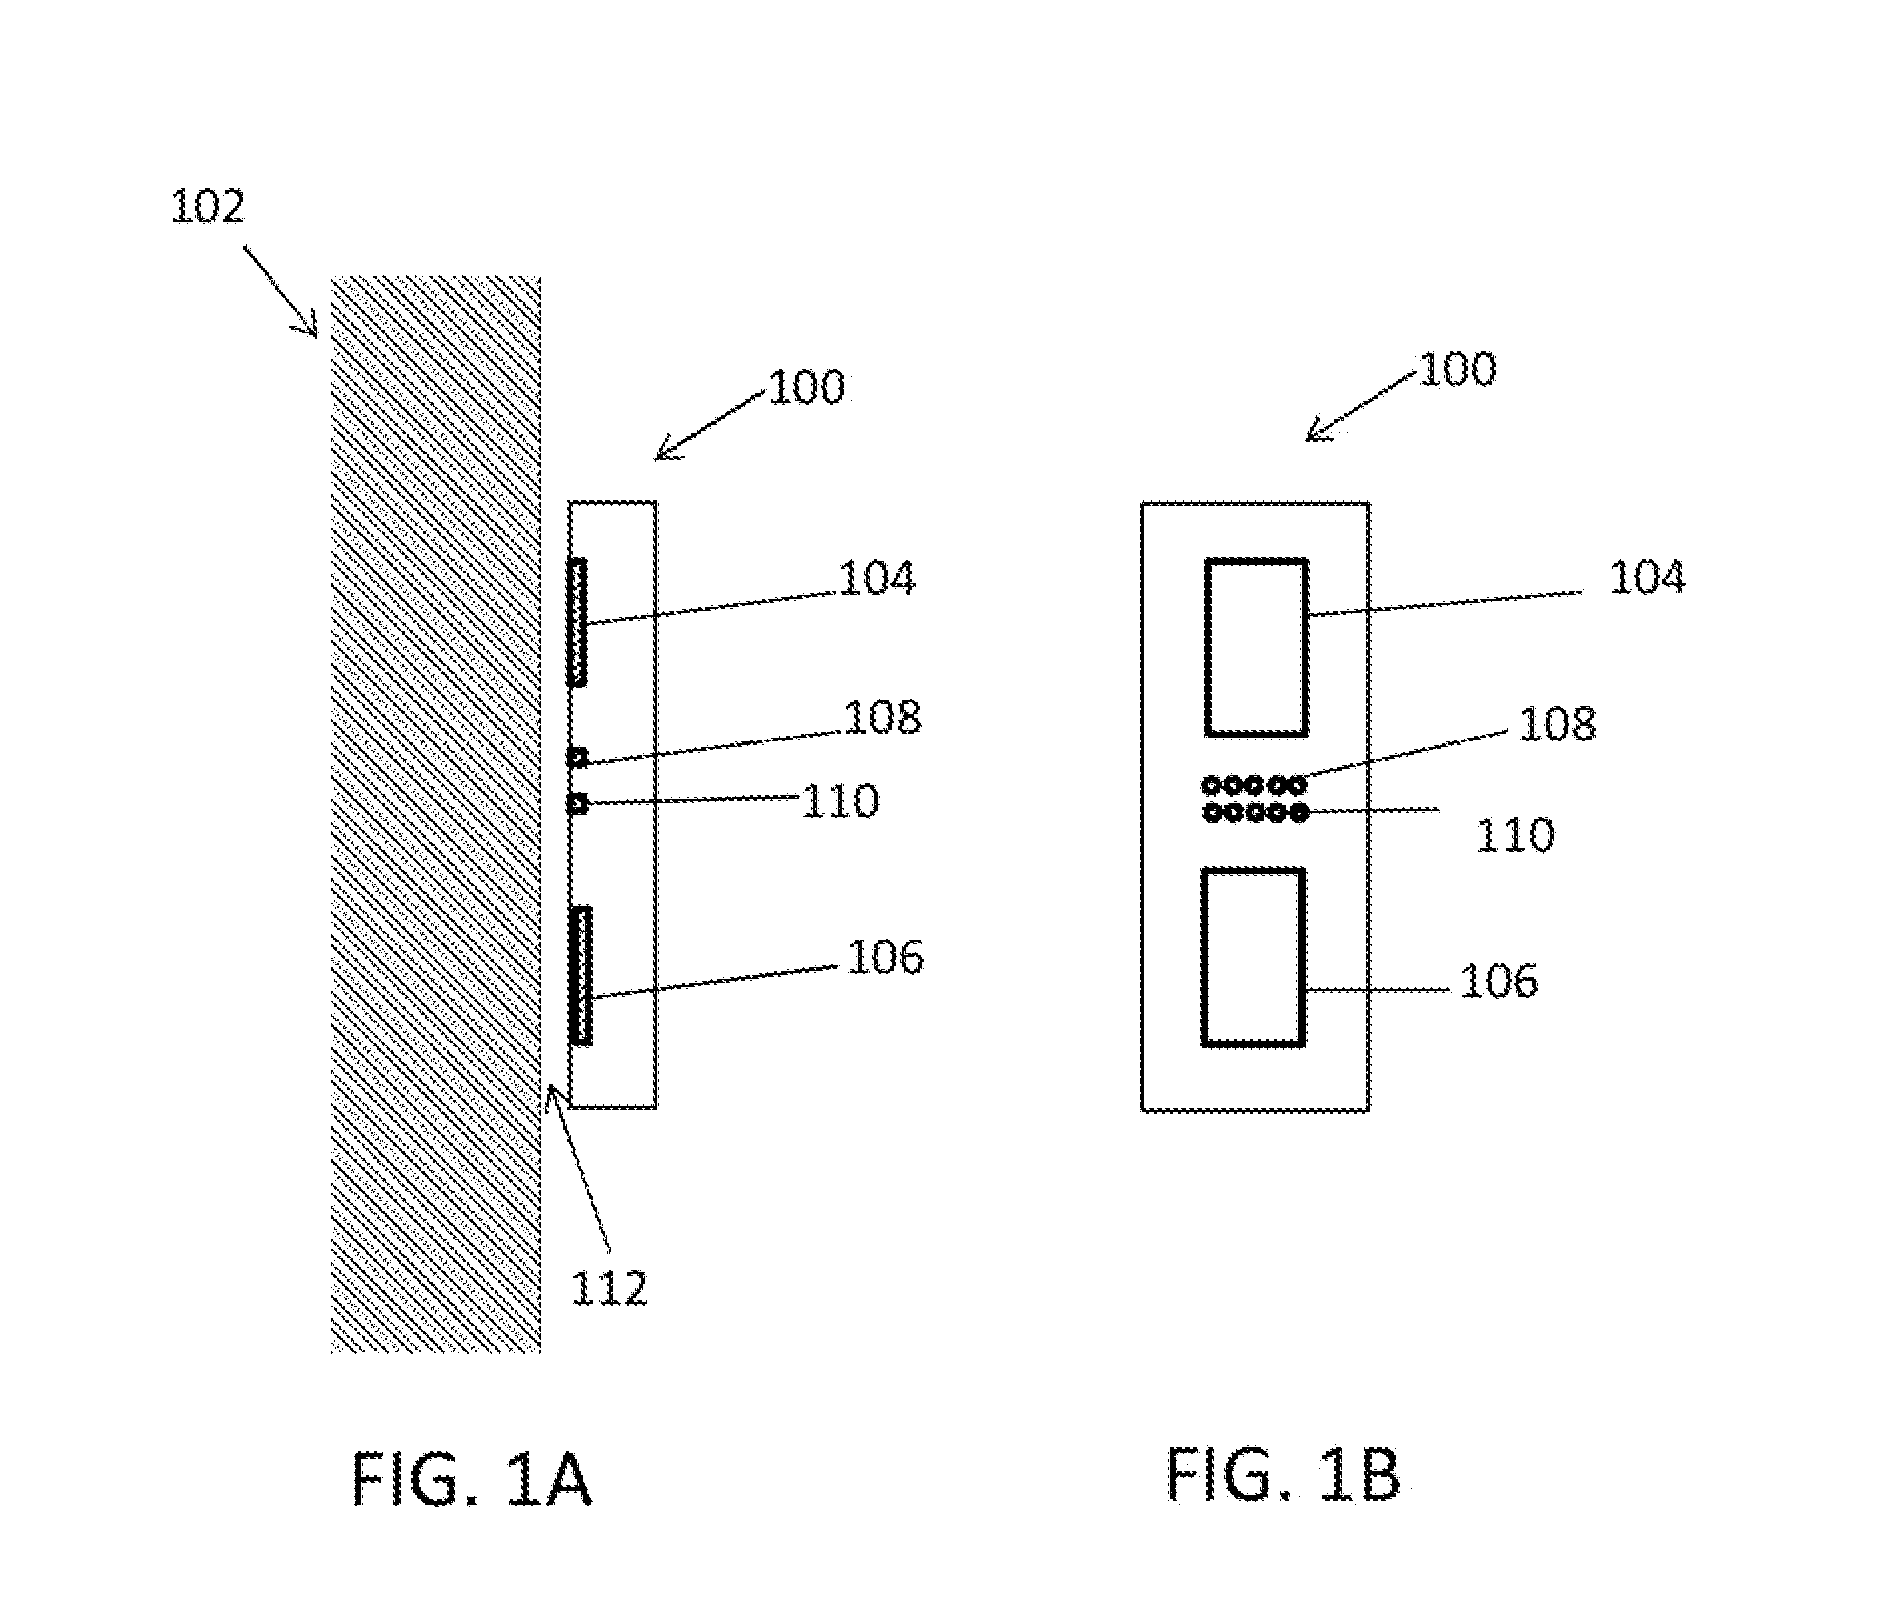 Method of leakage current and borehole environment correction for oil based mud imager